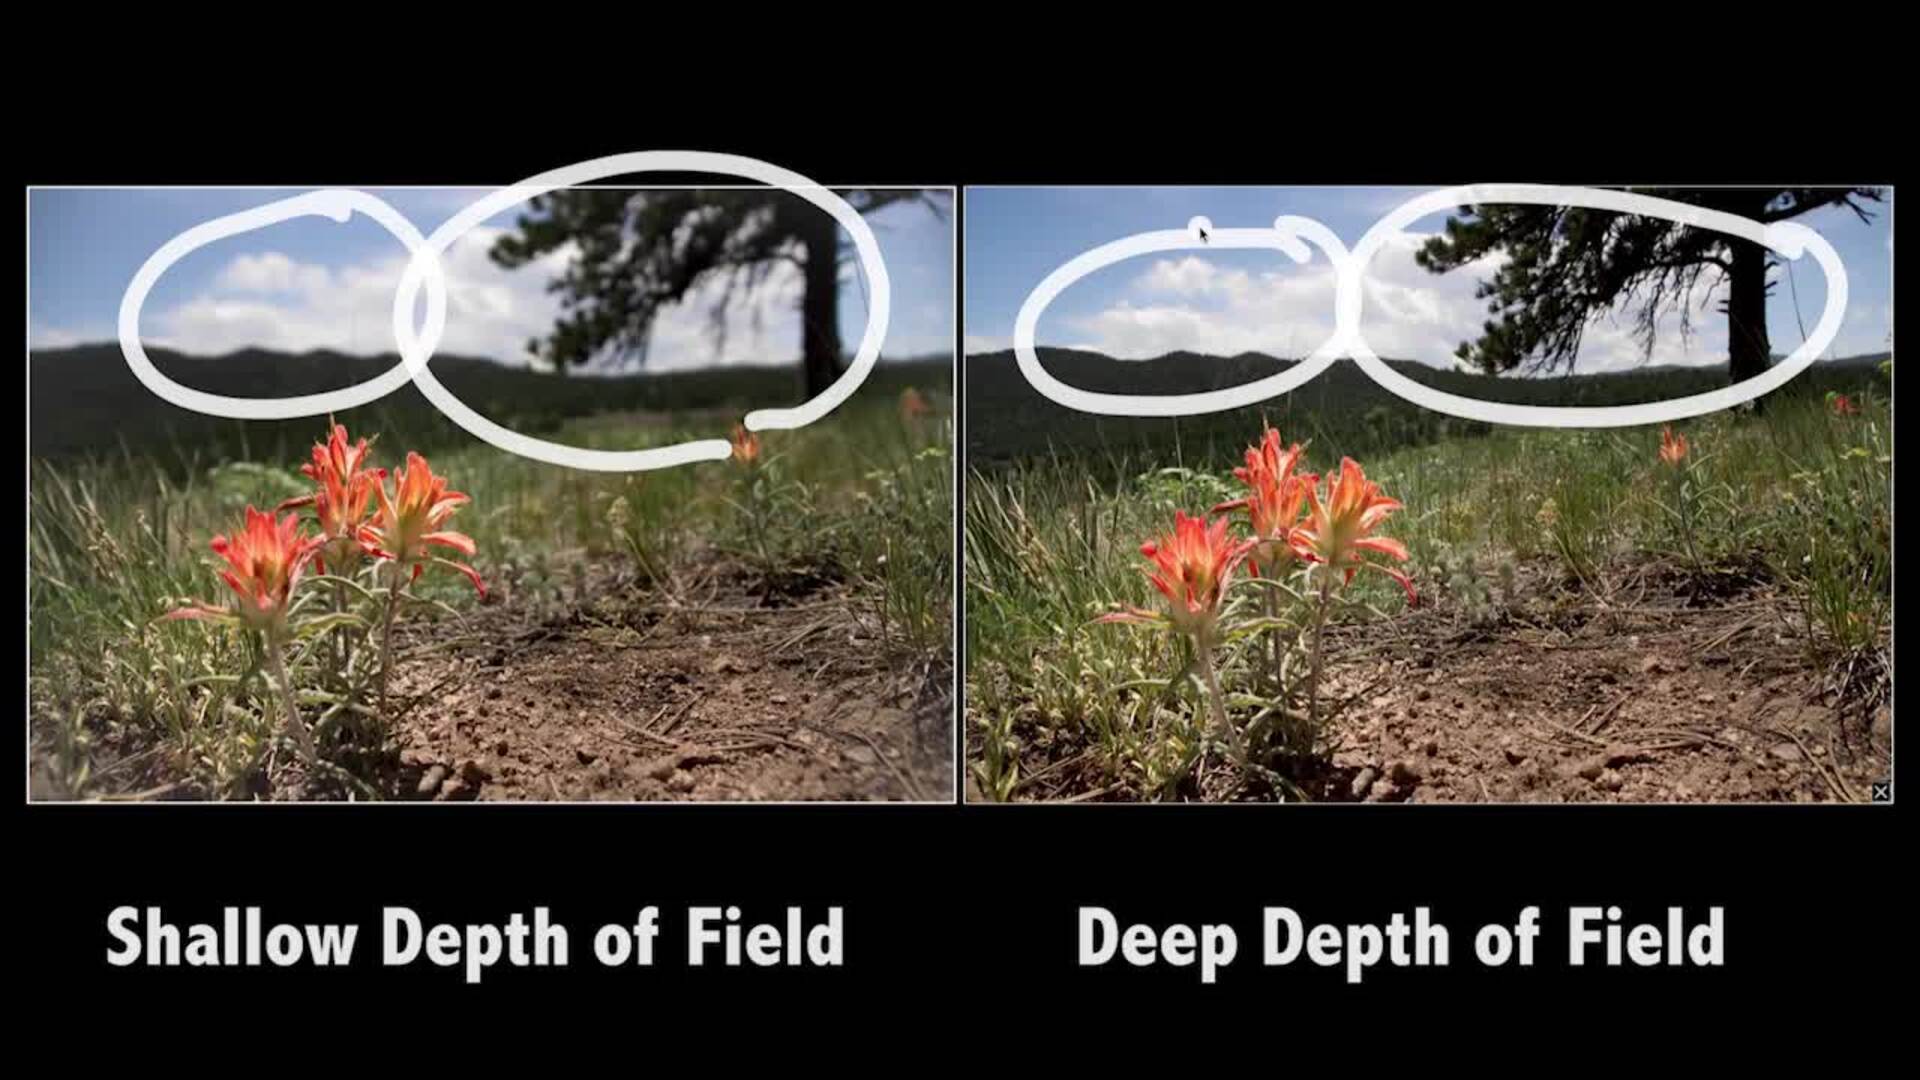 Session 6: Depth of Field